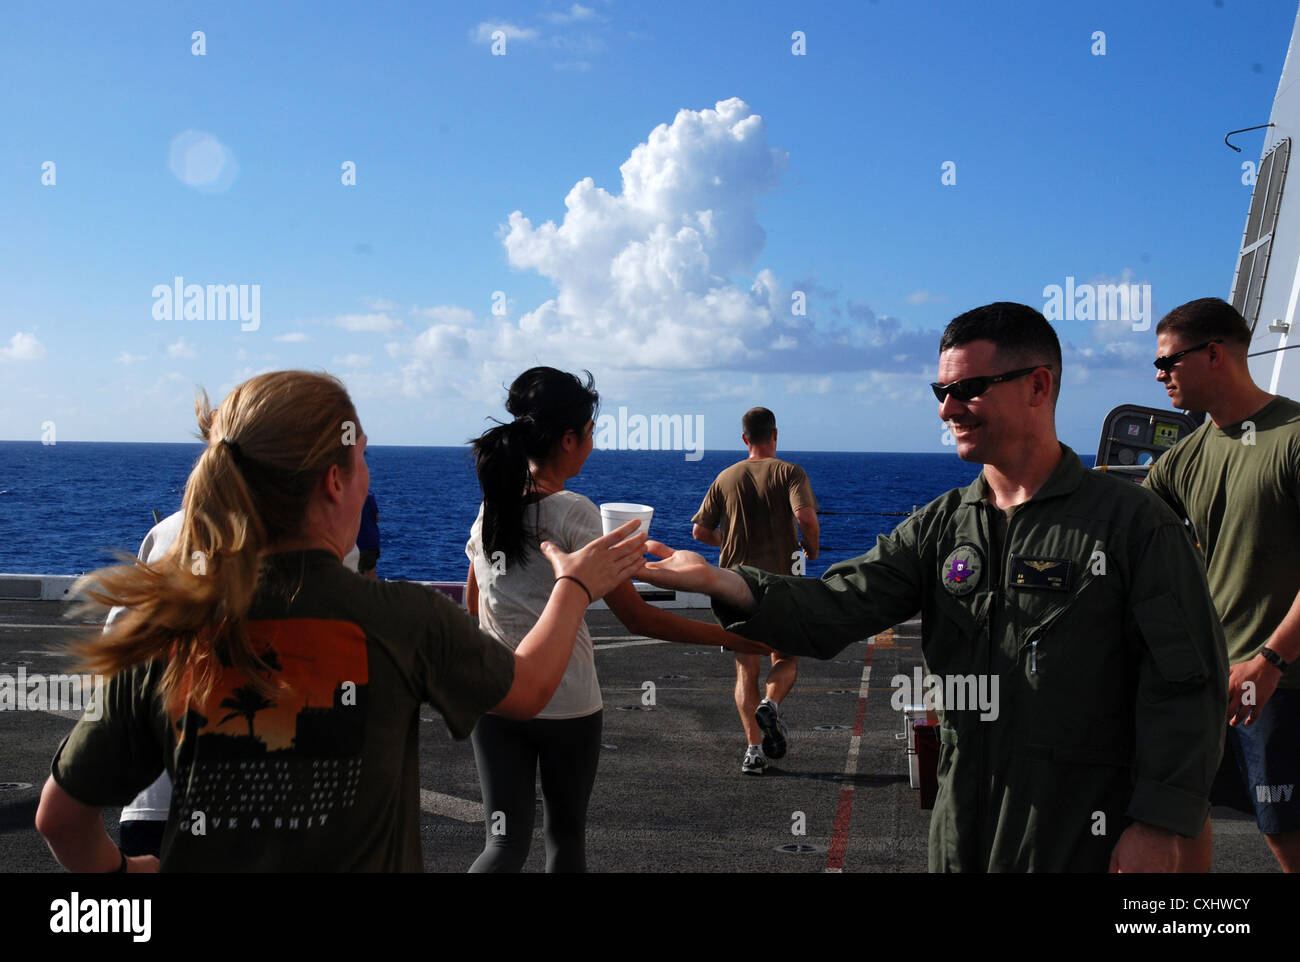 Capt. Paige Stull grabs a cup of water from Capt. Buckshot Mattson during the Landaker 5k held by the â€œPurple Foxesâ€ of Marine Medium Helicopter Squadron (HMM) 364 (REIN) aboard amphibious transport dock ship USS Green Bay (LPD 20). Green Bay is part of the Peleliu Amphibious Ready Group currently underway on a Western Pacific deployment with amphibious assault ship USS Peleliu (LHA 5) and amphibious dock landing ship USS Rushmore (LSD 47). Stock Photo